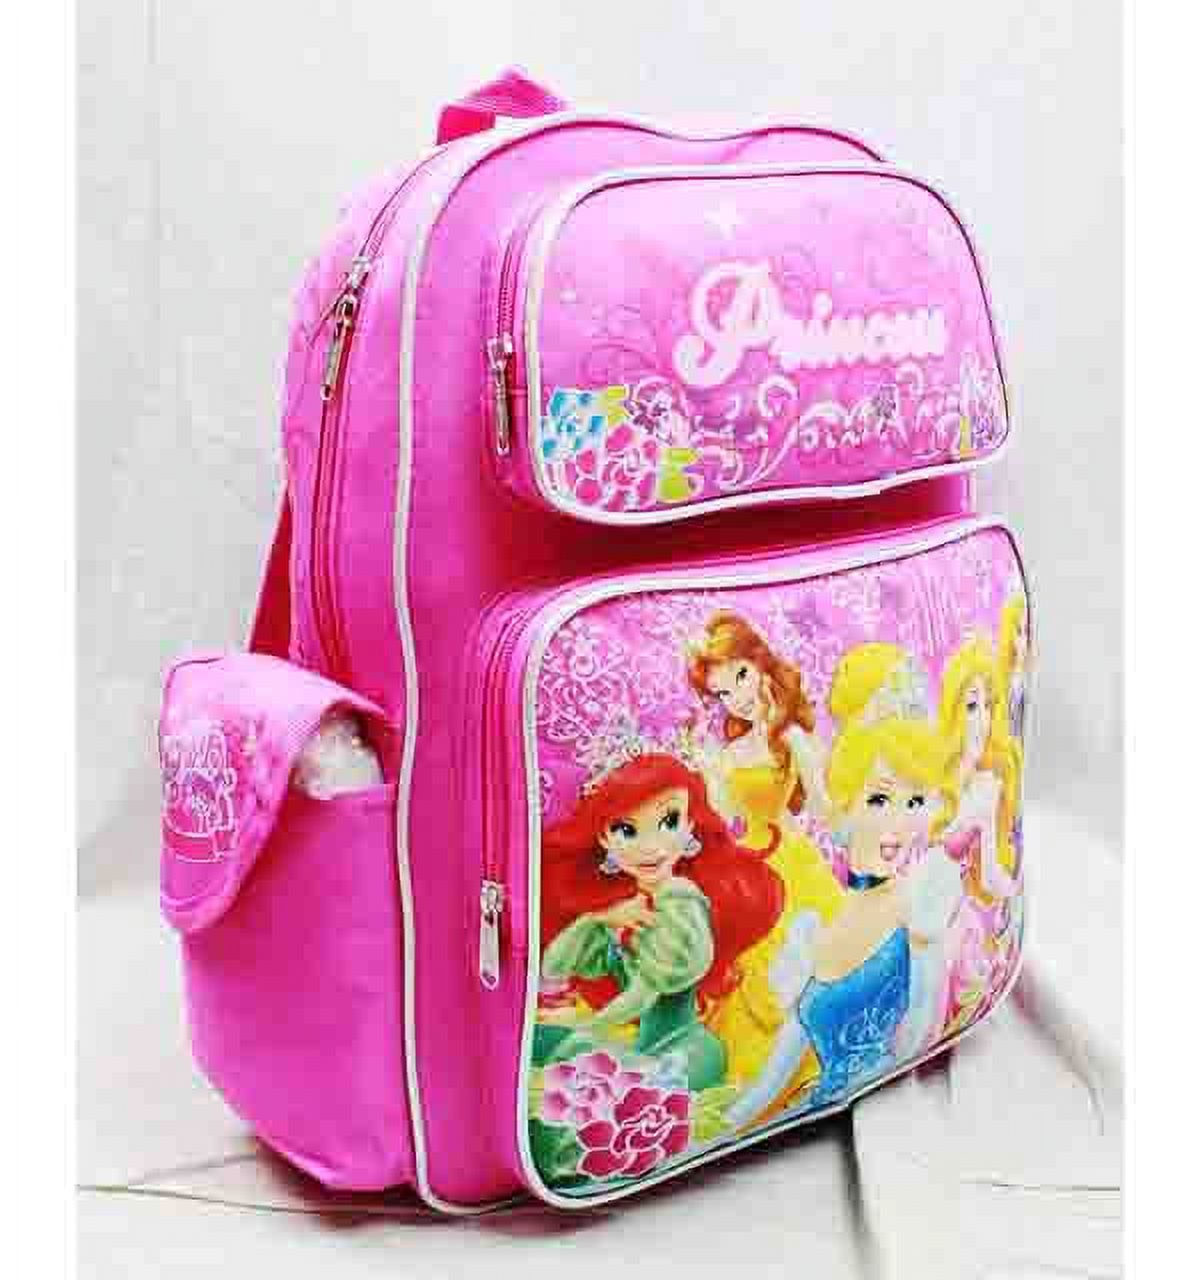 Backpack - - Princess w/ Flowers Pink Large Girls School Bag New a03888 - image 2 of 3